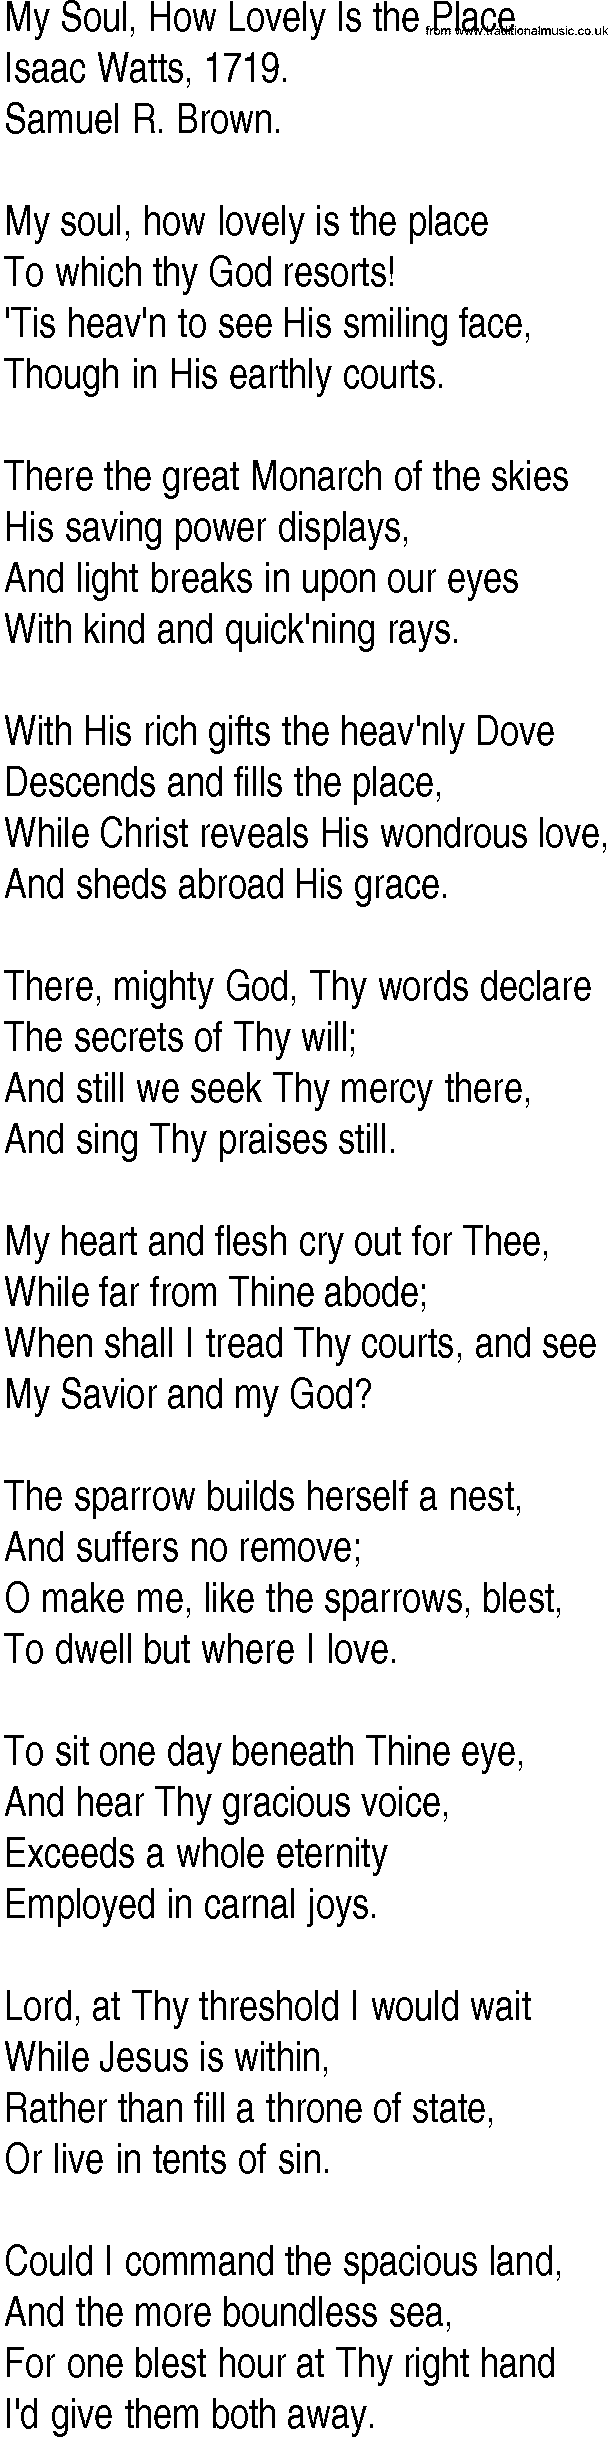 Hymn and Gospel Song: My Soul, How Lovely Is the Place by Isaac Watts lyrics